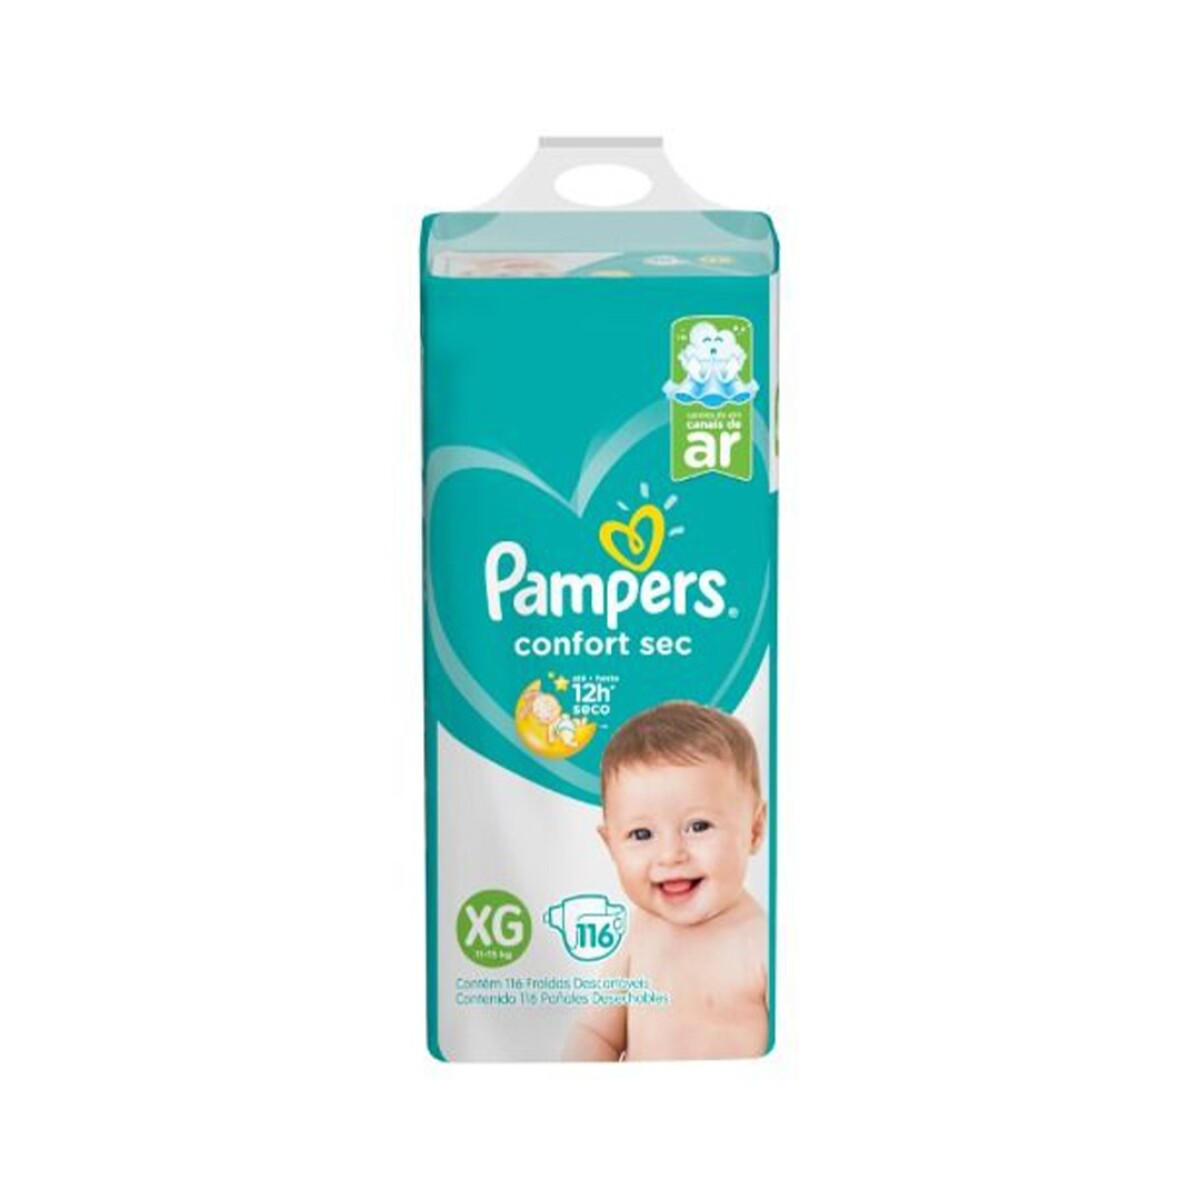 Pañales Pampers Confort Sec Xg 116 Unidades - 001 